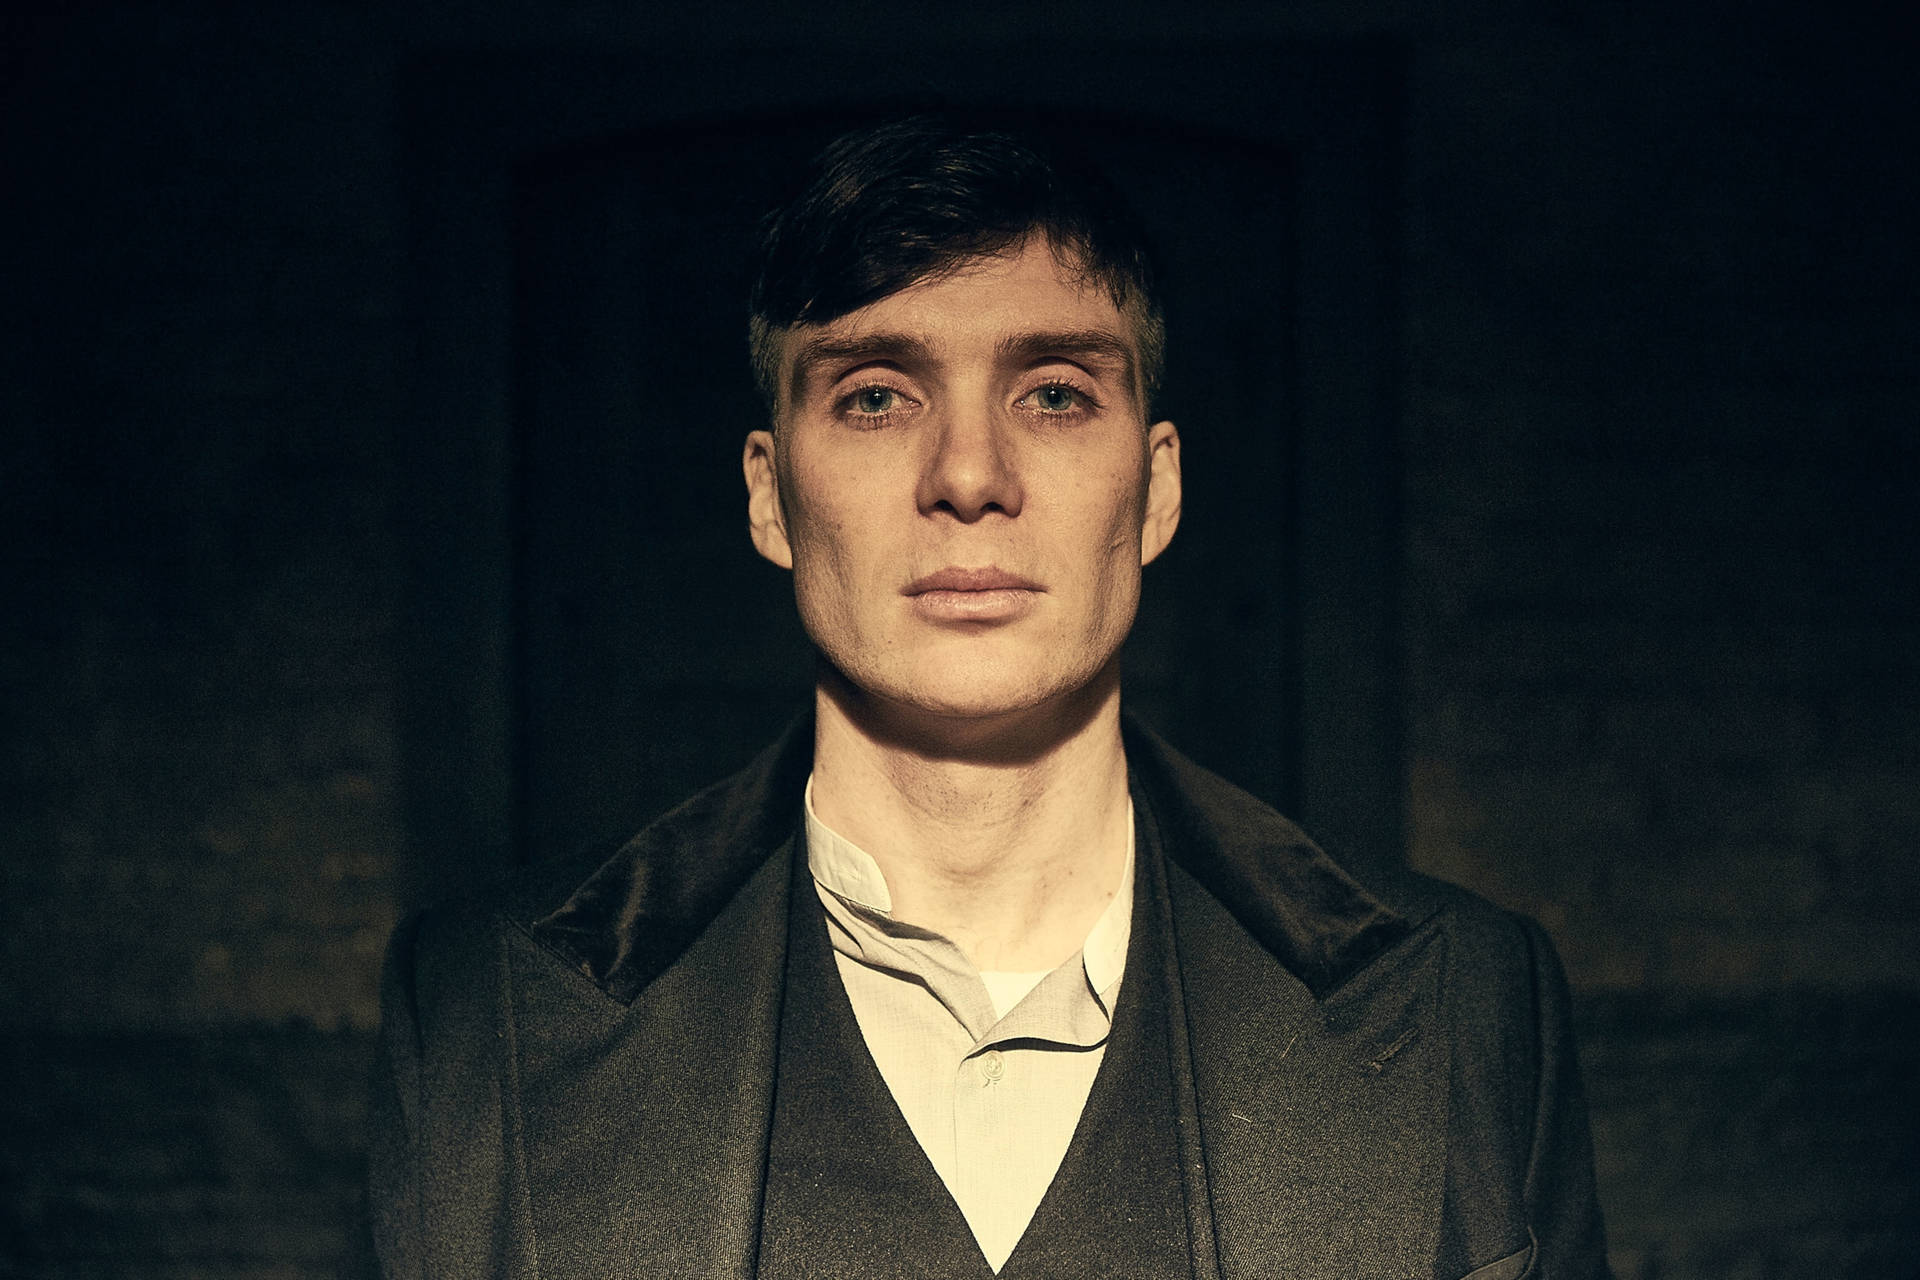 Top 999+ Tommy Shelby 4k Wallpapers Full HD, 4K✅Free to Use